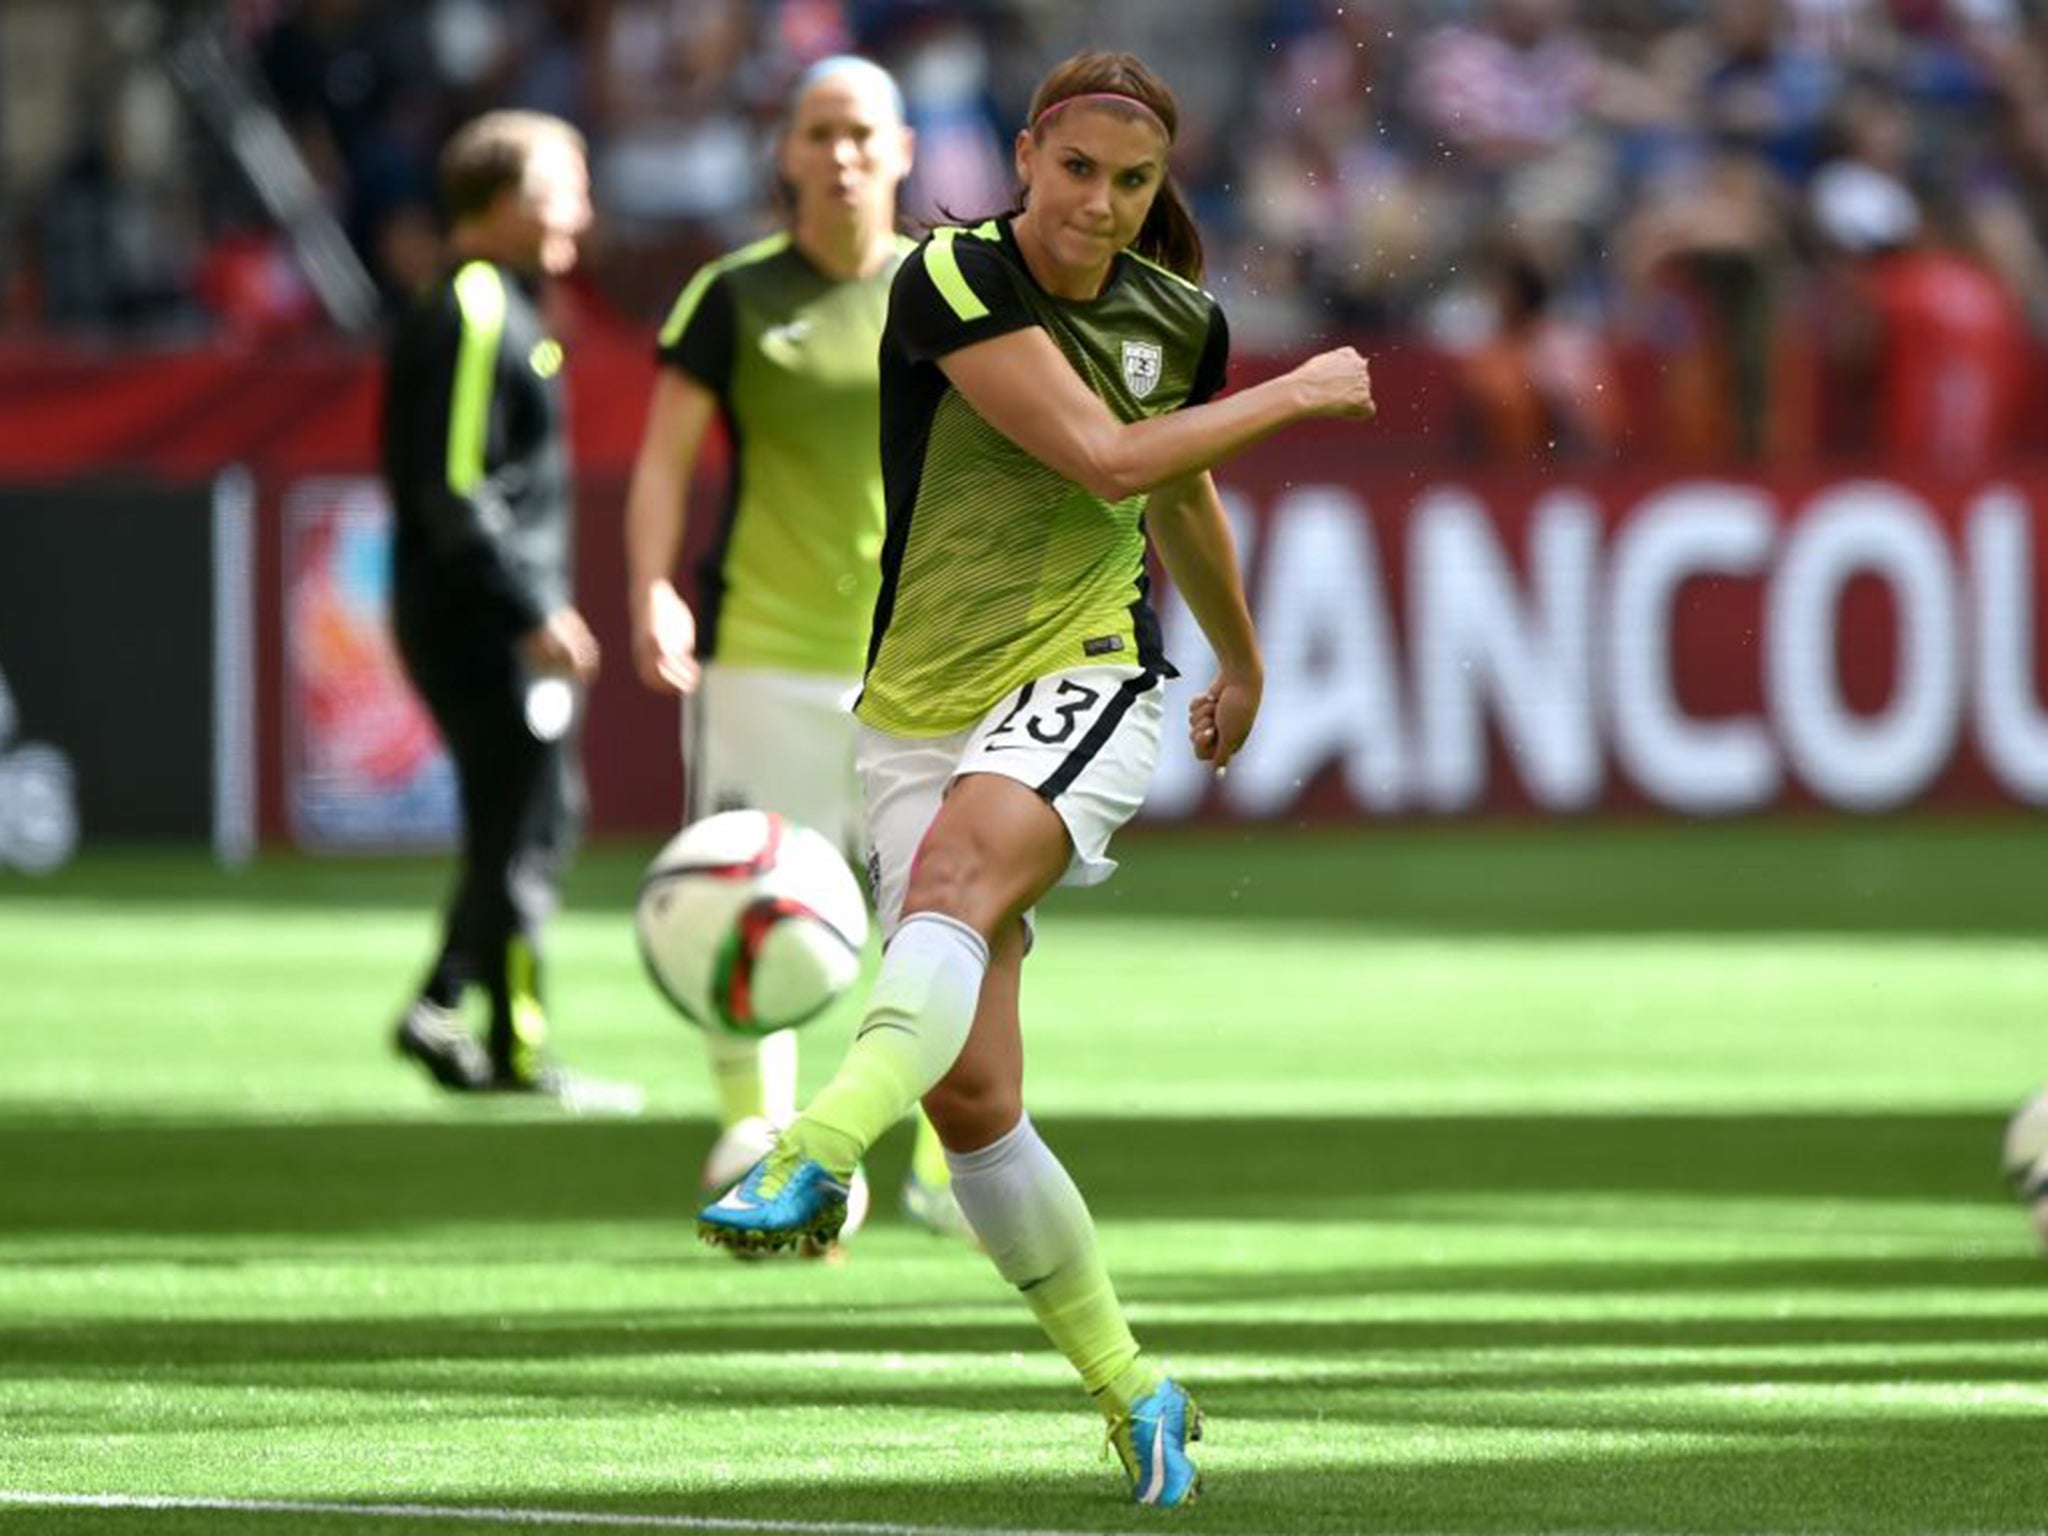 Alex Morgan made her first start in the tournament against Colombia on Monday, scoring her 52nd goal in 87 games